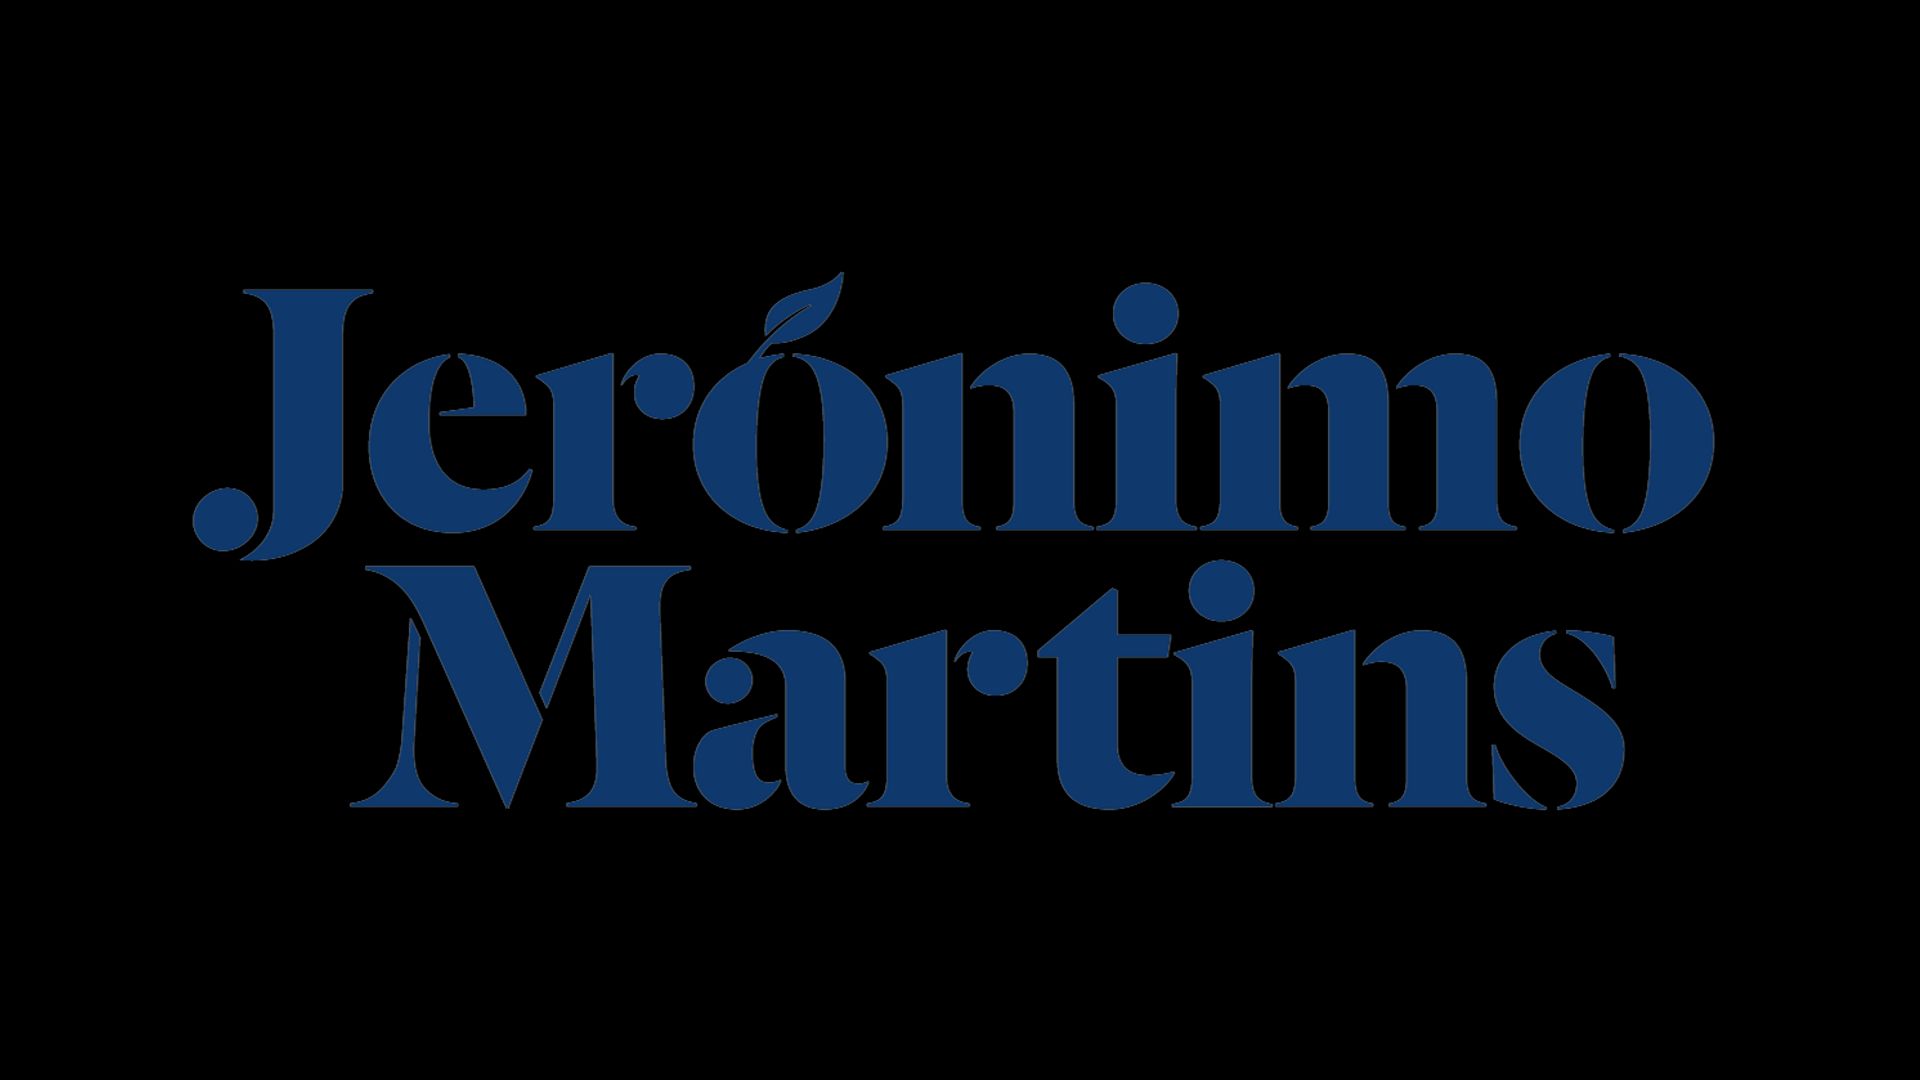 Jerónimo Martins Group logo in navy blue on a white background